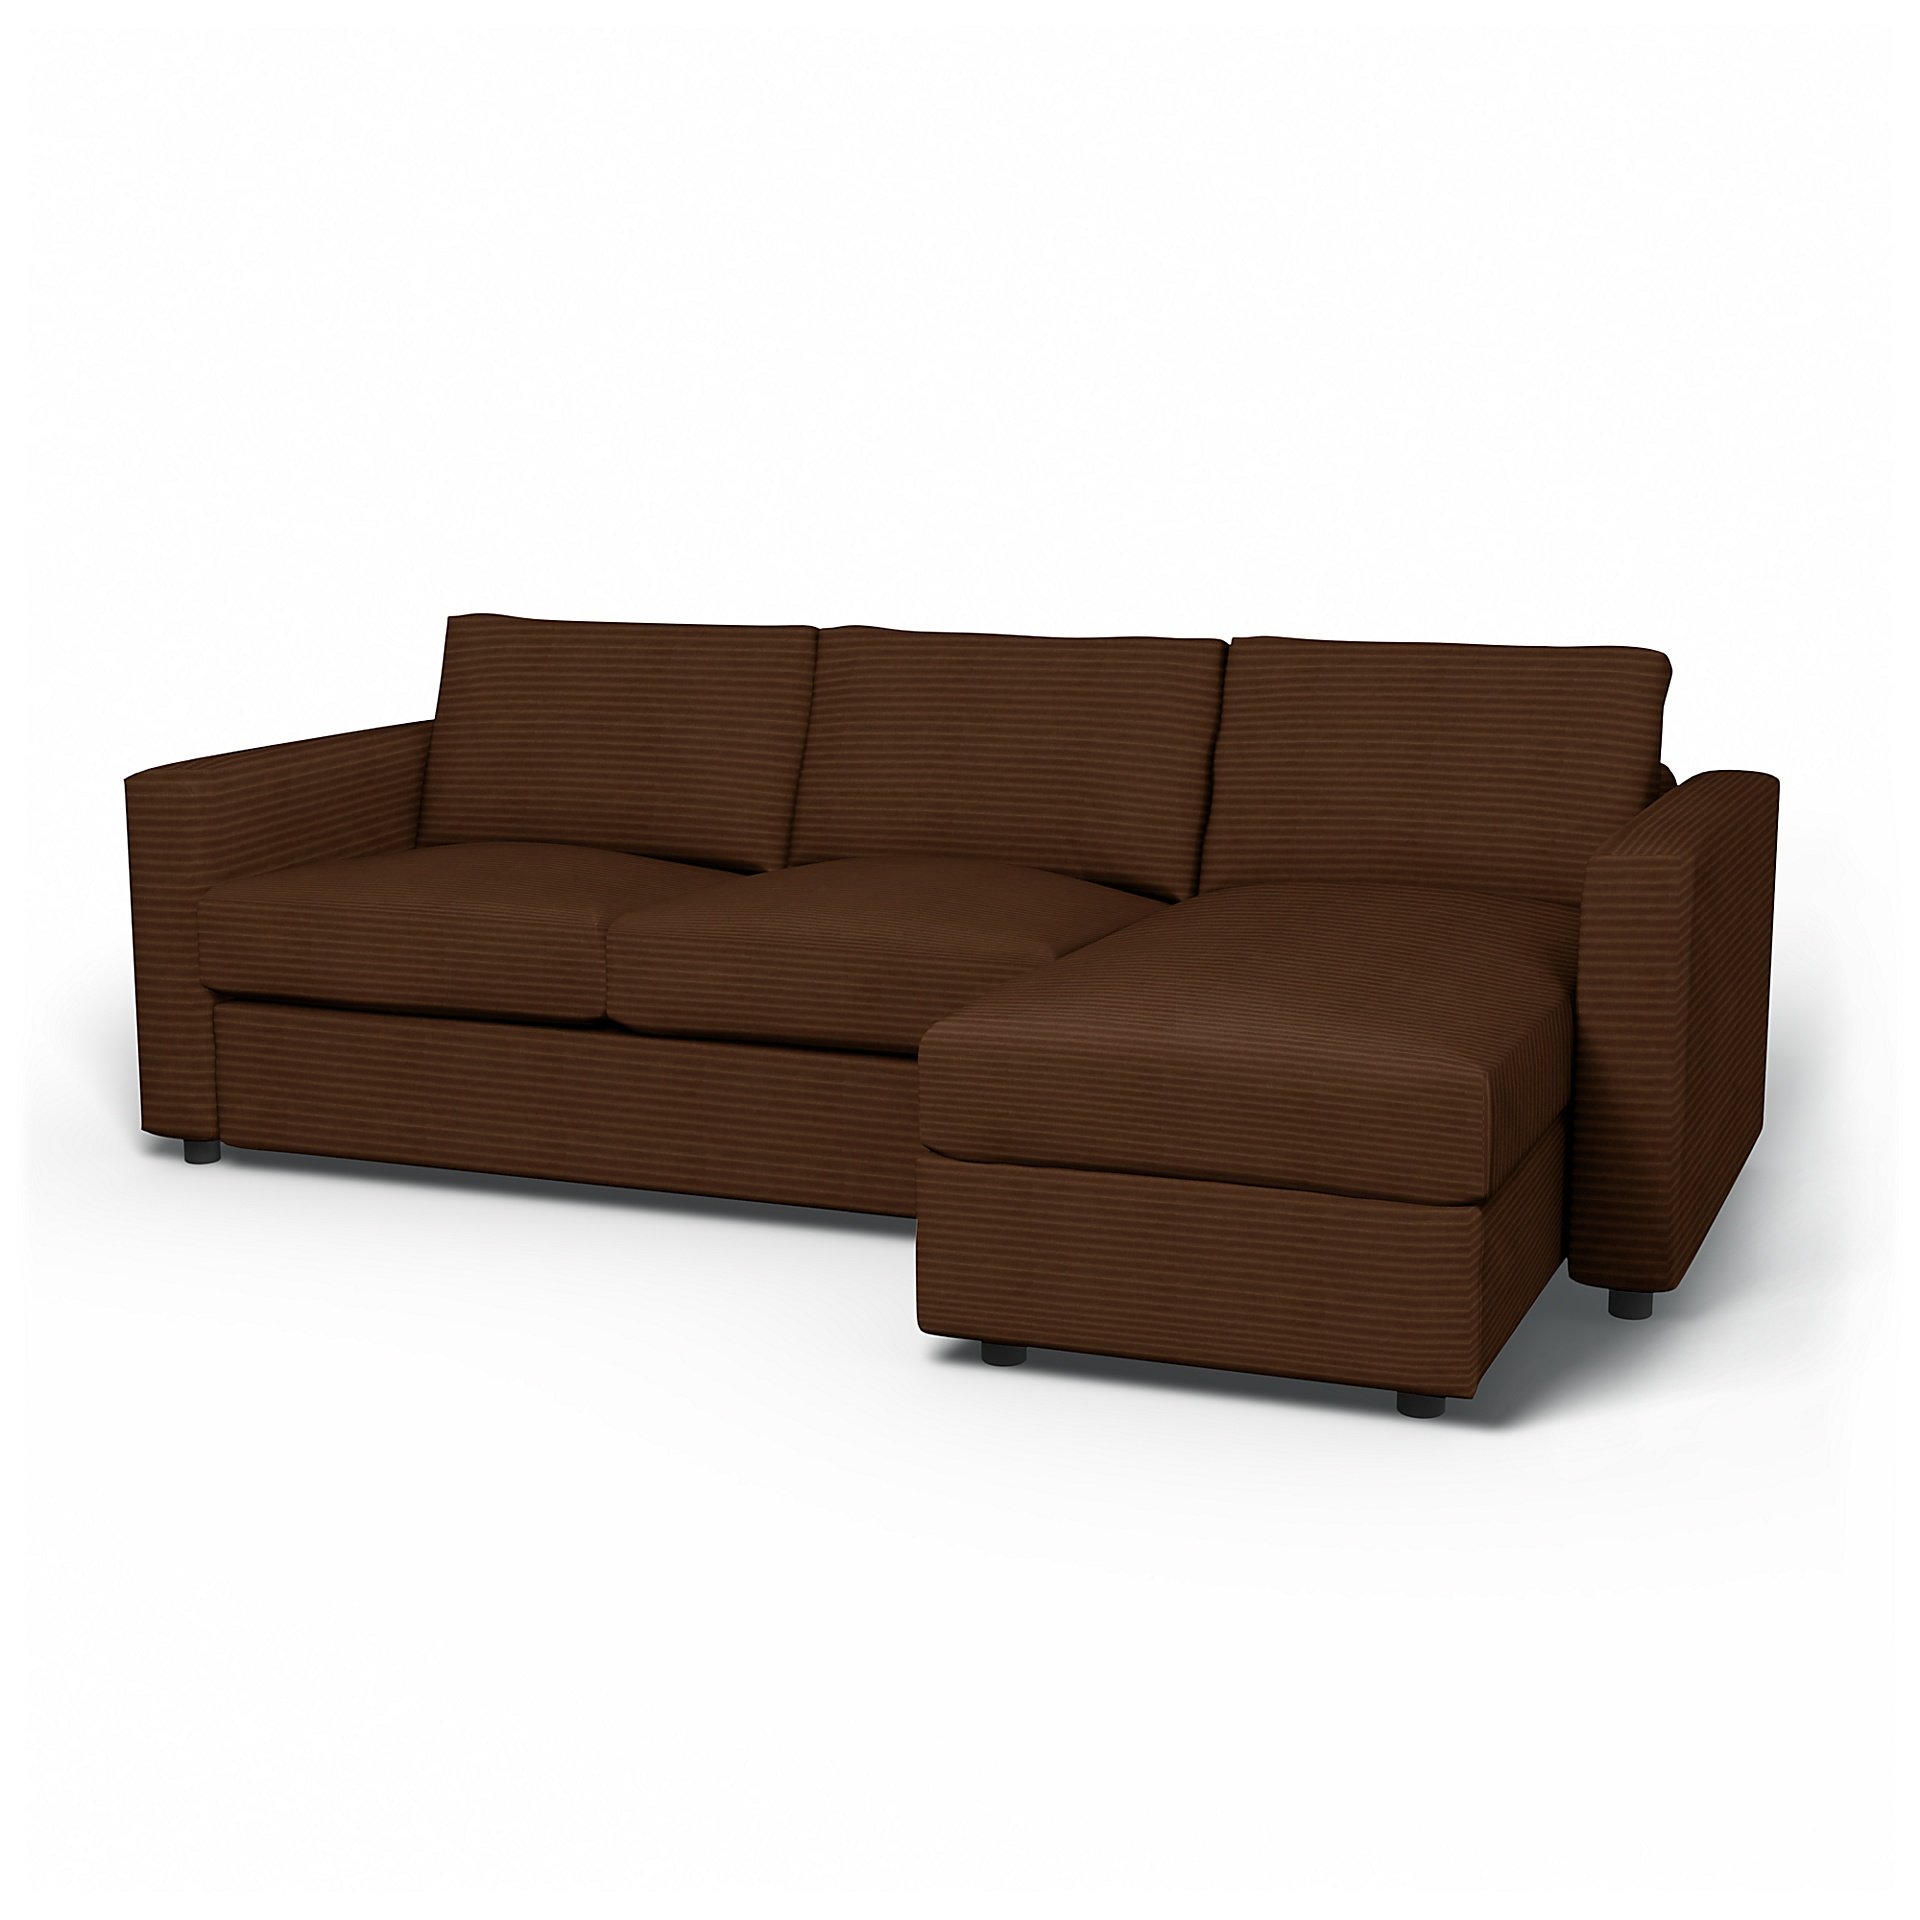 IKEA - Vimle 2 Seater Sofa with Chaise Cover, Chocolate Brown, Corduroy - Bemz